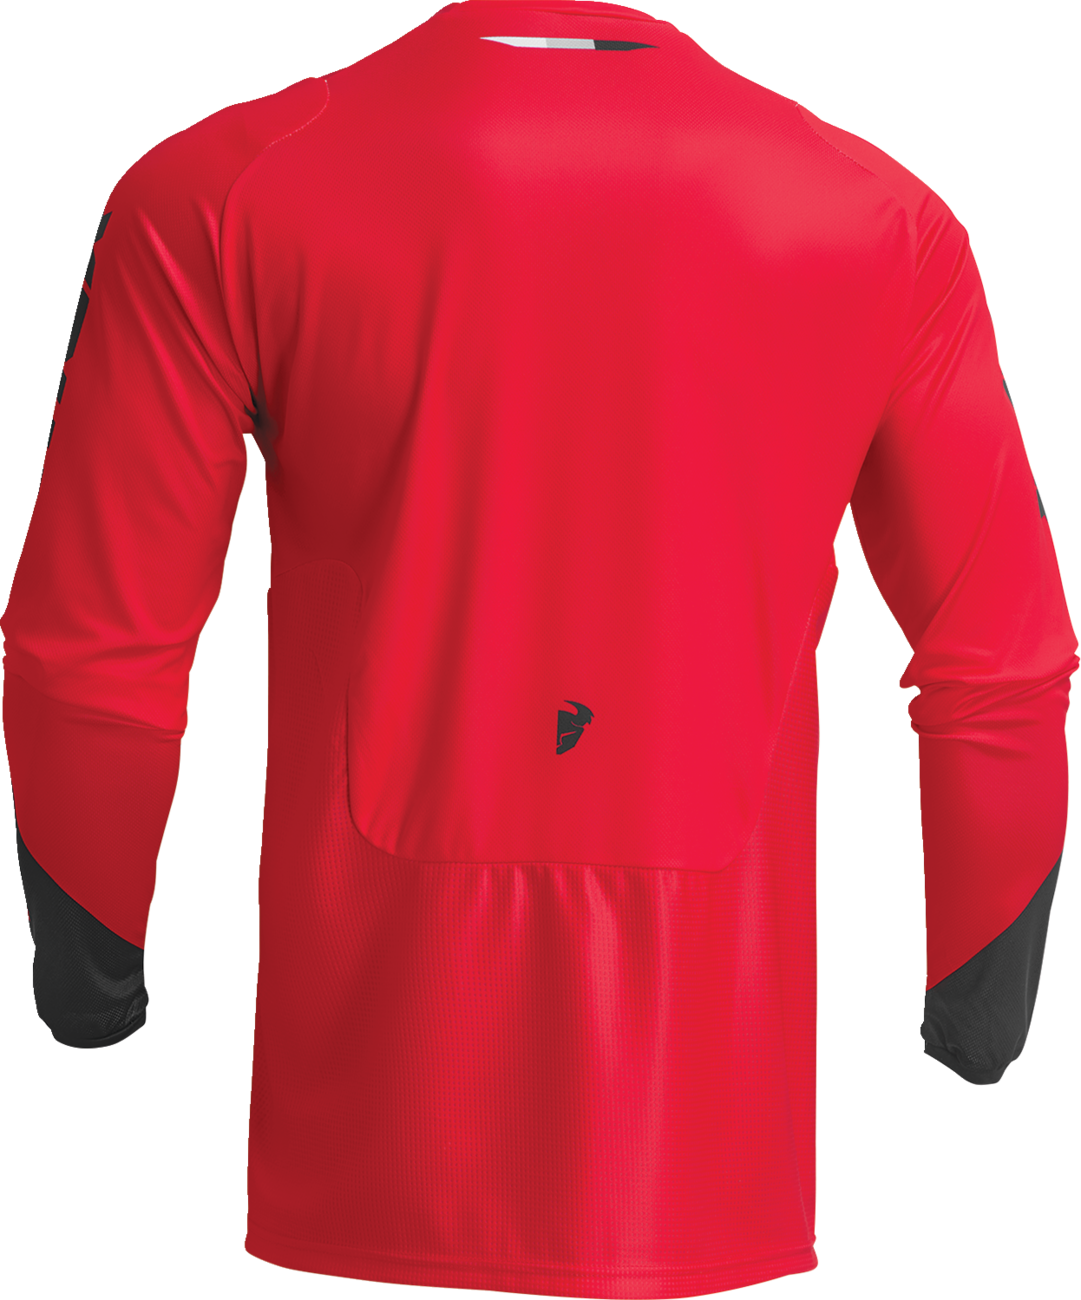 THOR Youth Pulse Tactic Jersey - Red - Medium 2912-2206